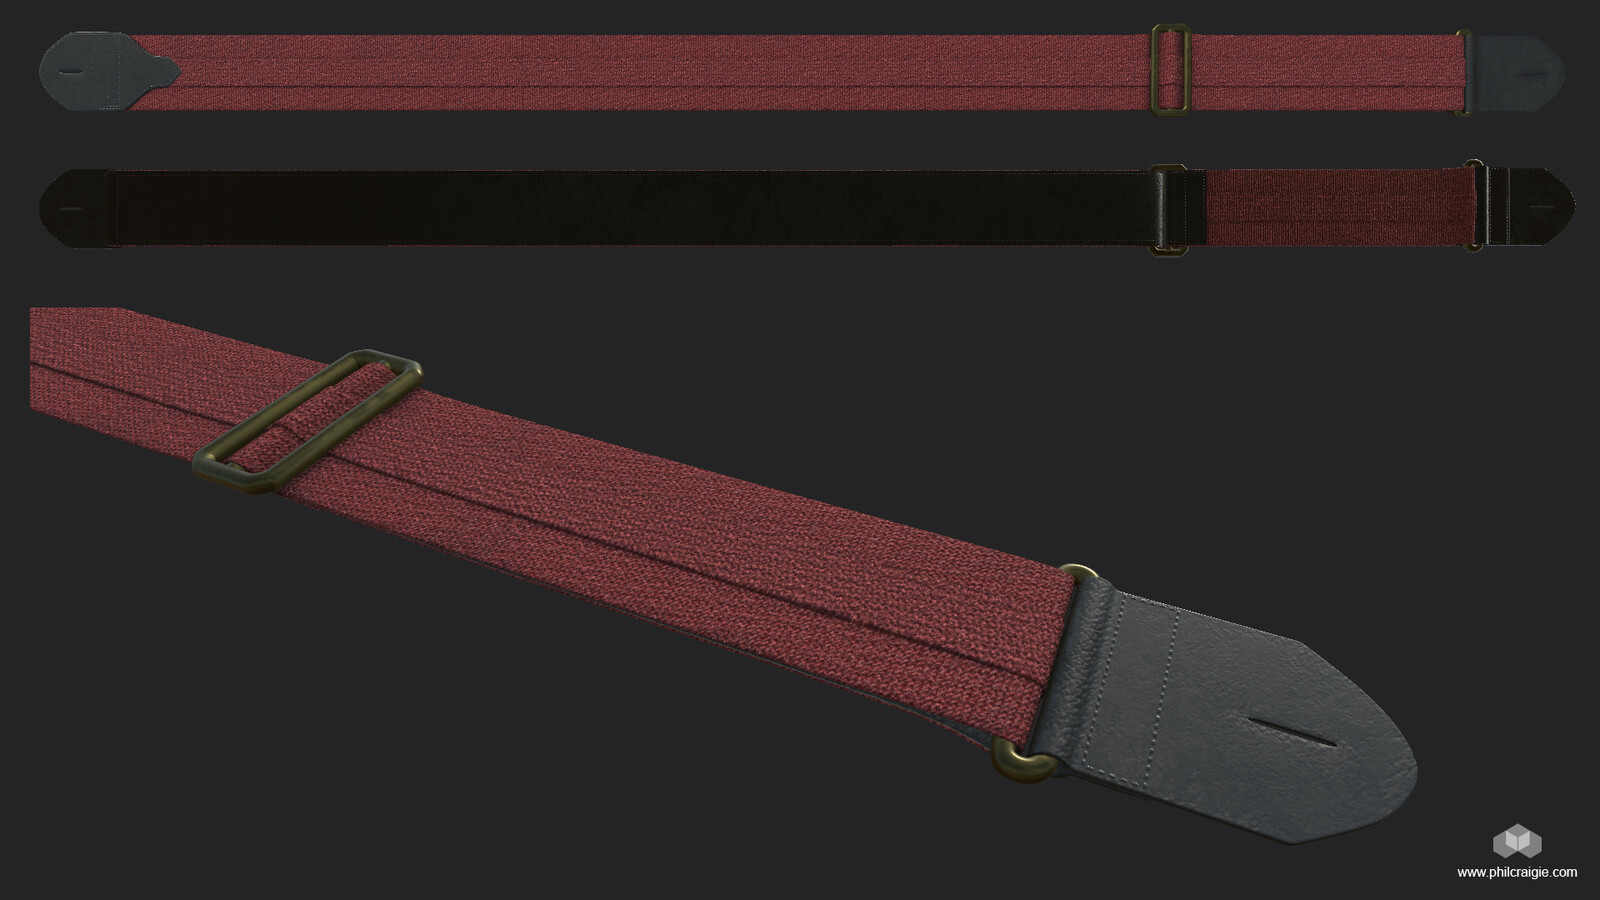 The guitar strap, based on the  style Andy Summers used in the early 8o's.
Modelled in 3ds Max, Textured in Substance Painter.